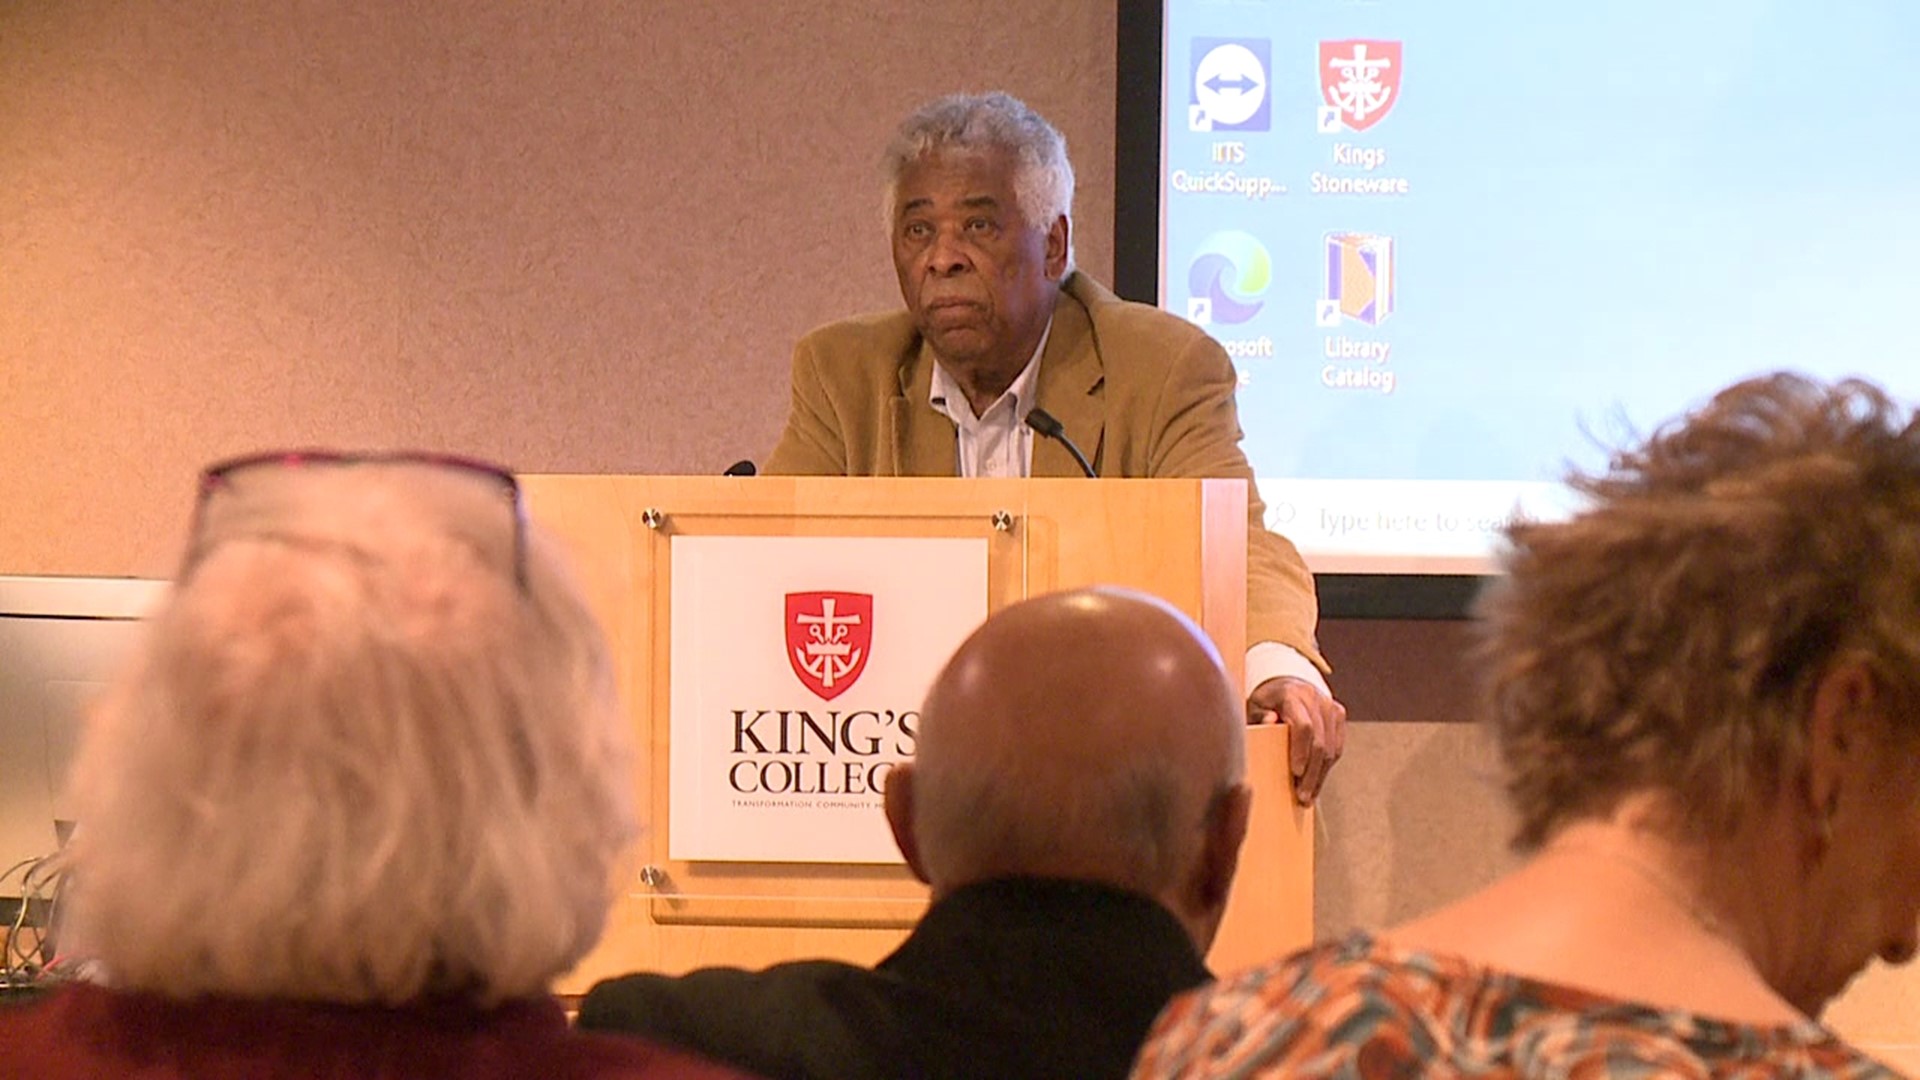 The program was held at the college Sunday afternoon ahead of Martin Luther King Day.